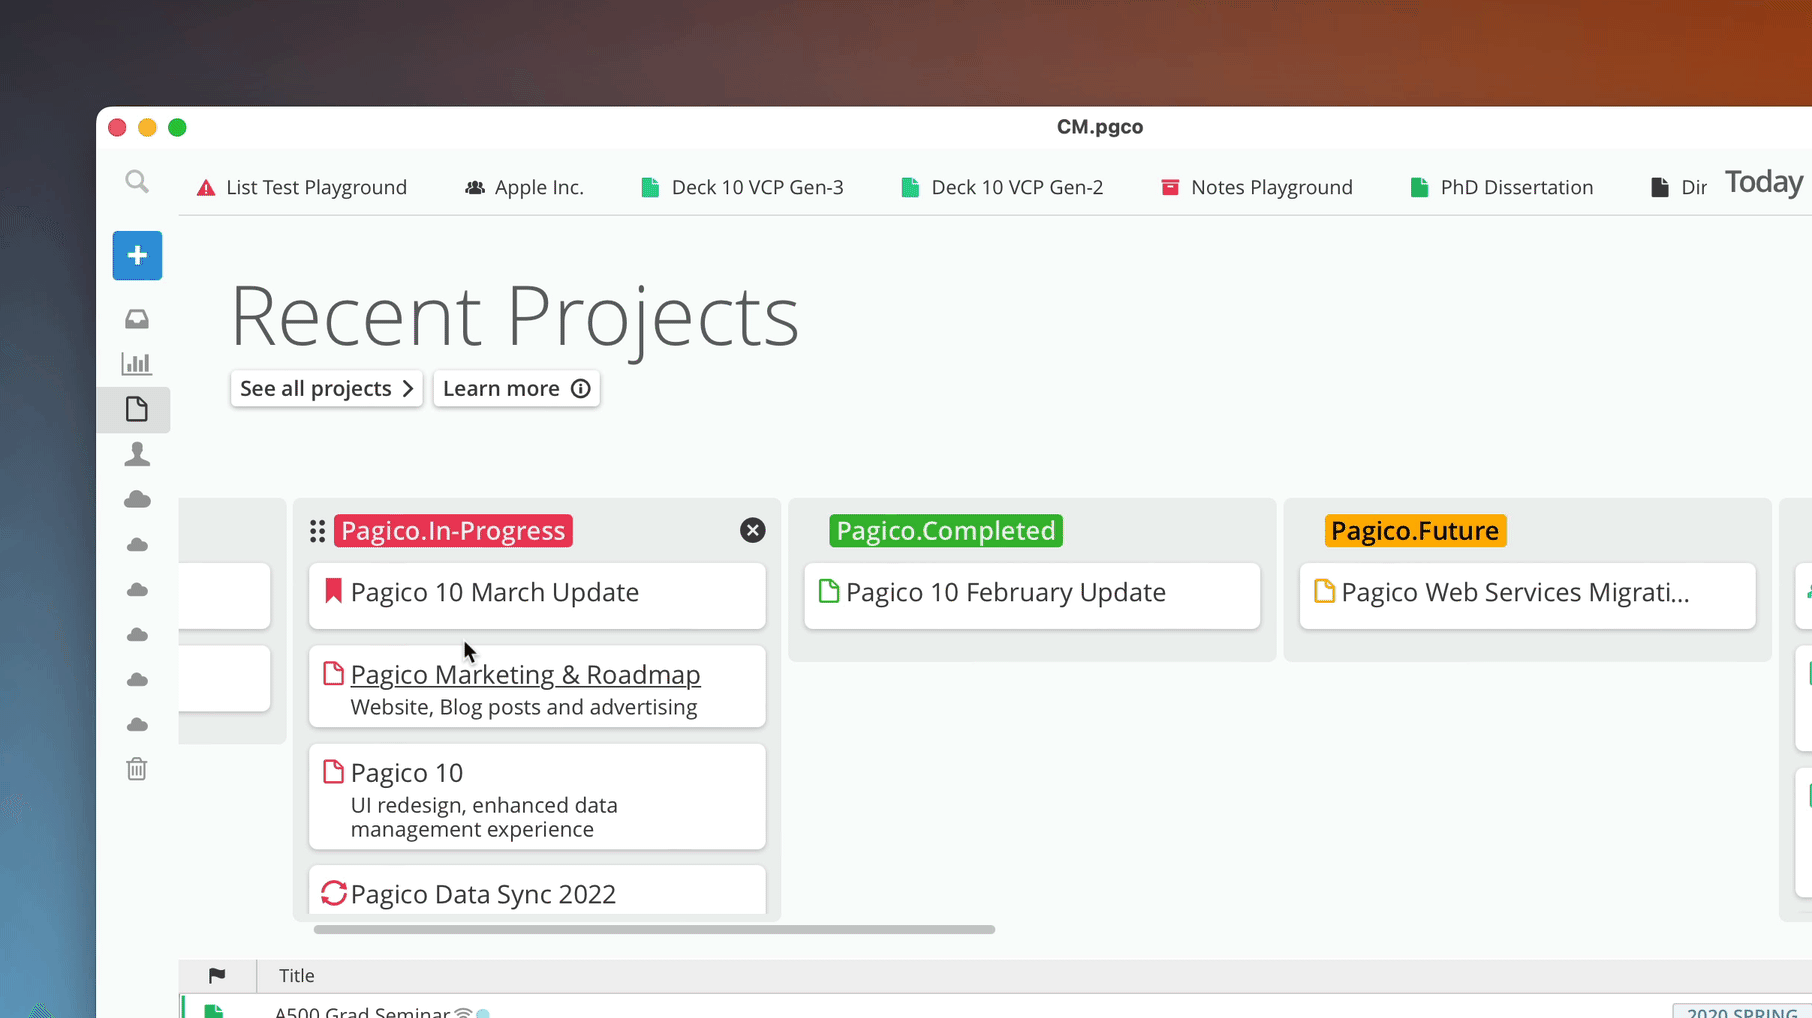 Manage your projects, kanban-style in the new Pagico 10